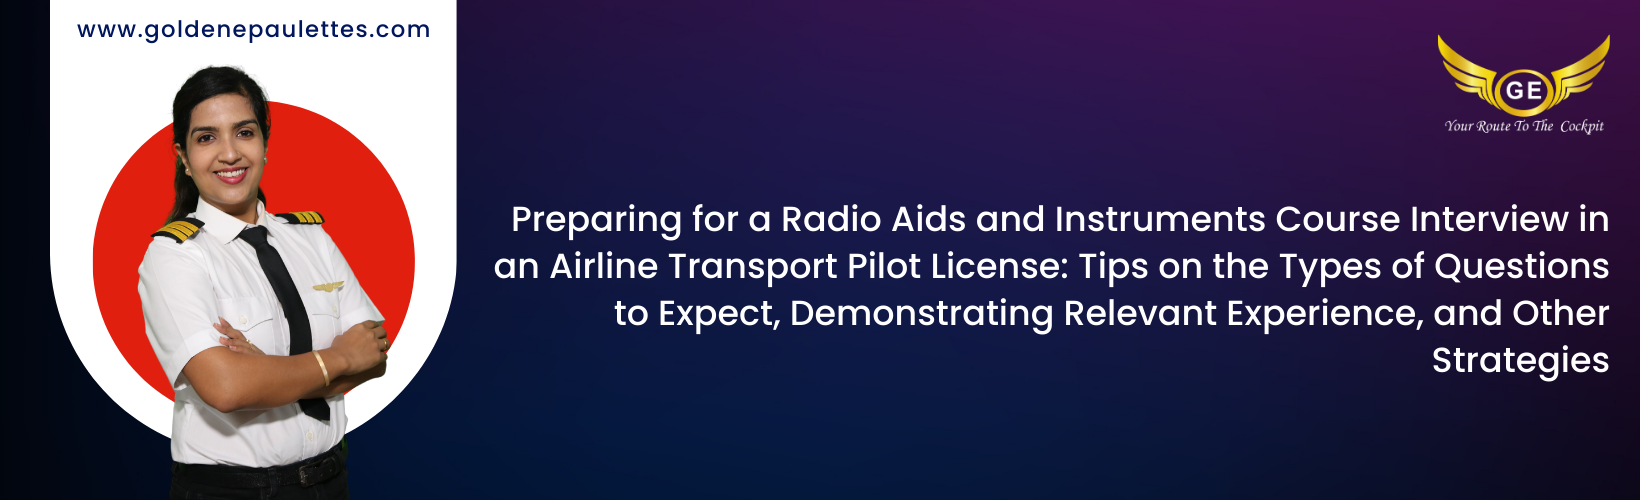 The Benefits of Having a Radio Aids and Instruments Course in Airline Transport Pilot License